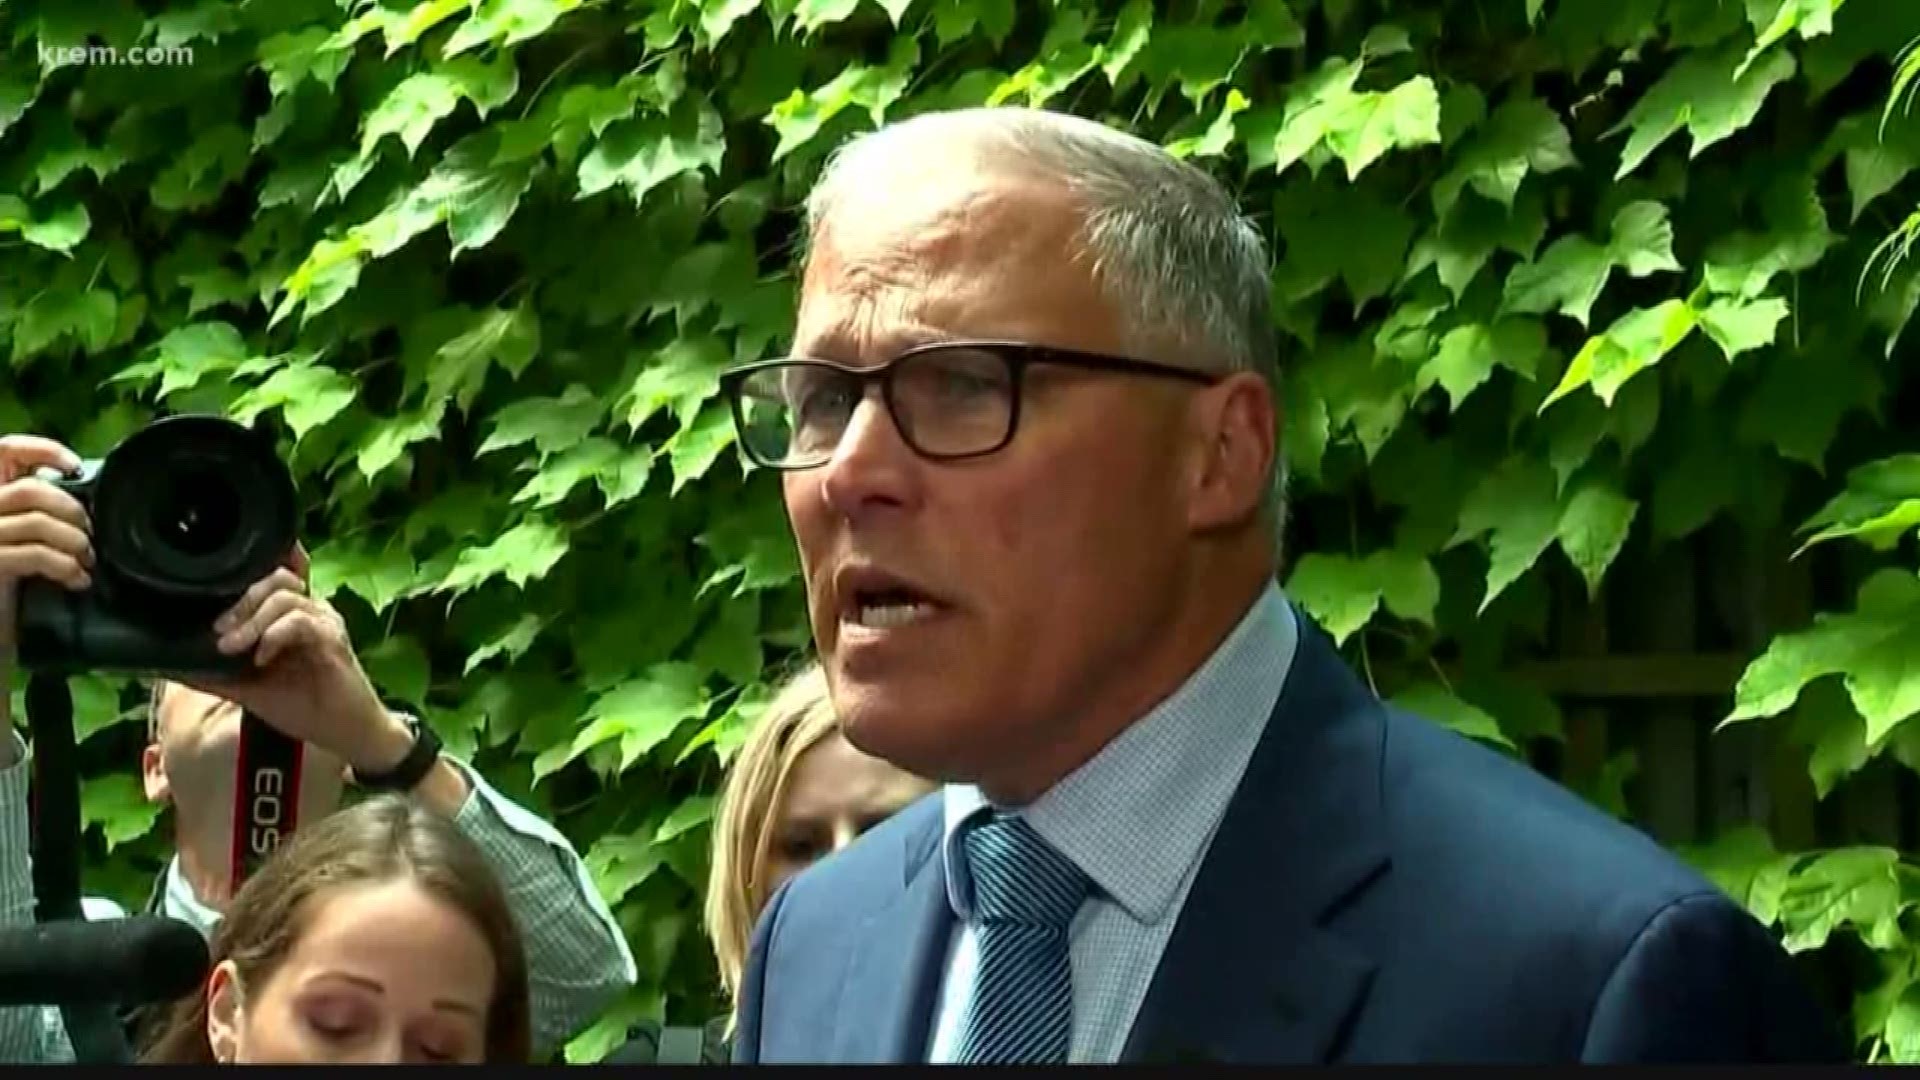 KREM's Whitney Ward gives a breakdown of Gov. Jay Inslee's decision to run for a third term as governor and AG Bob Ferguson's decision to run for re-election.